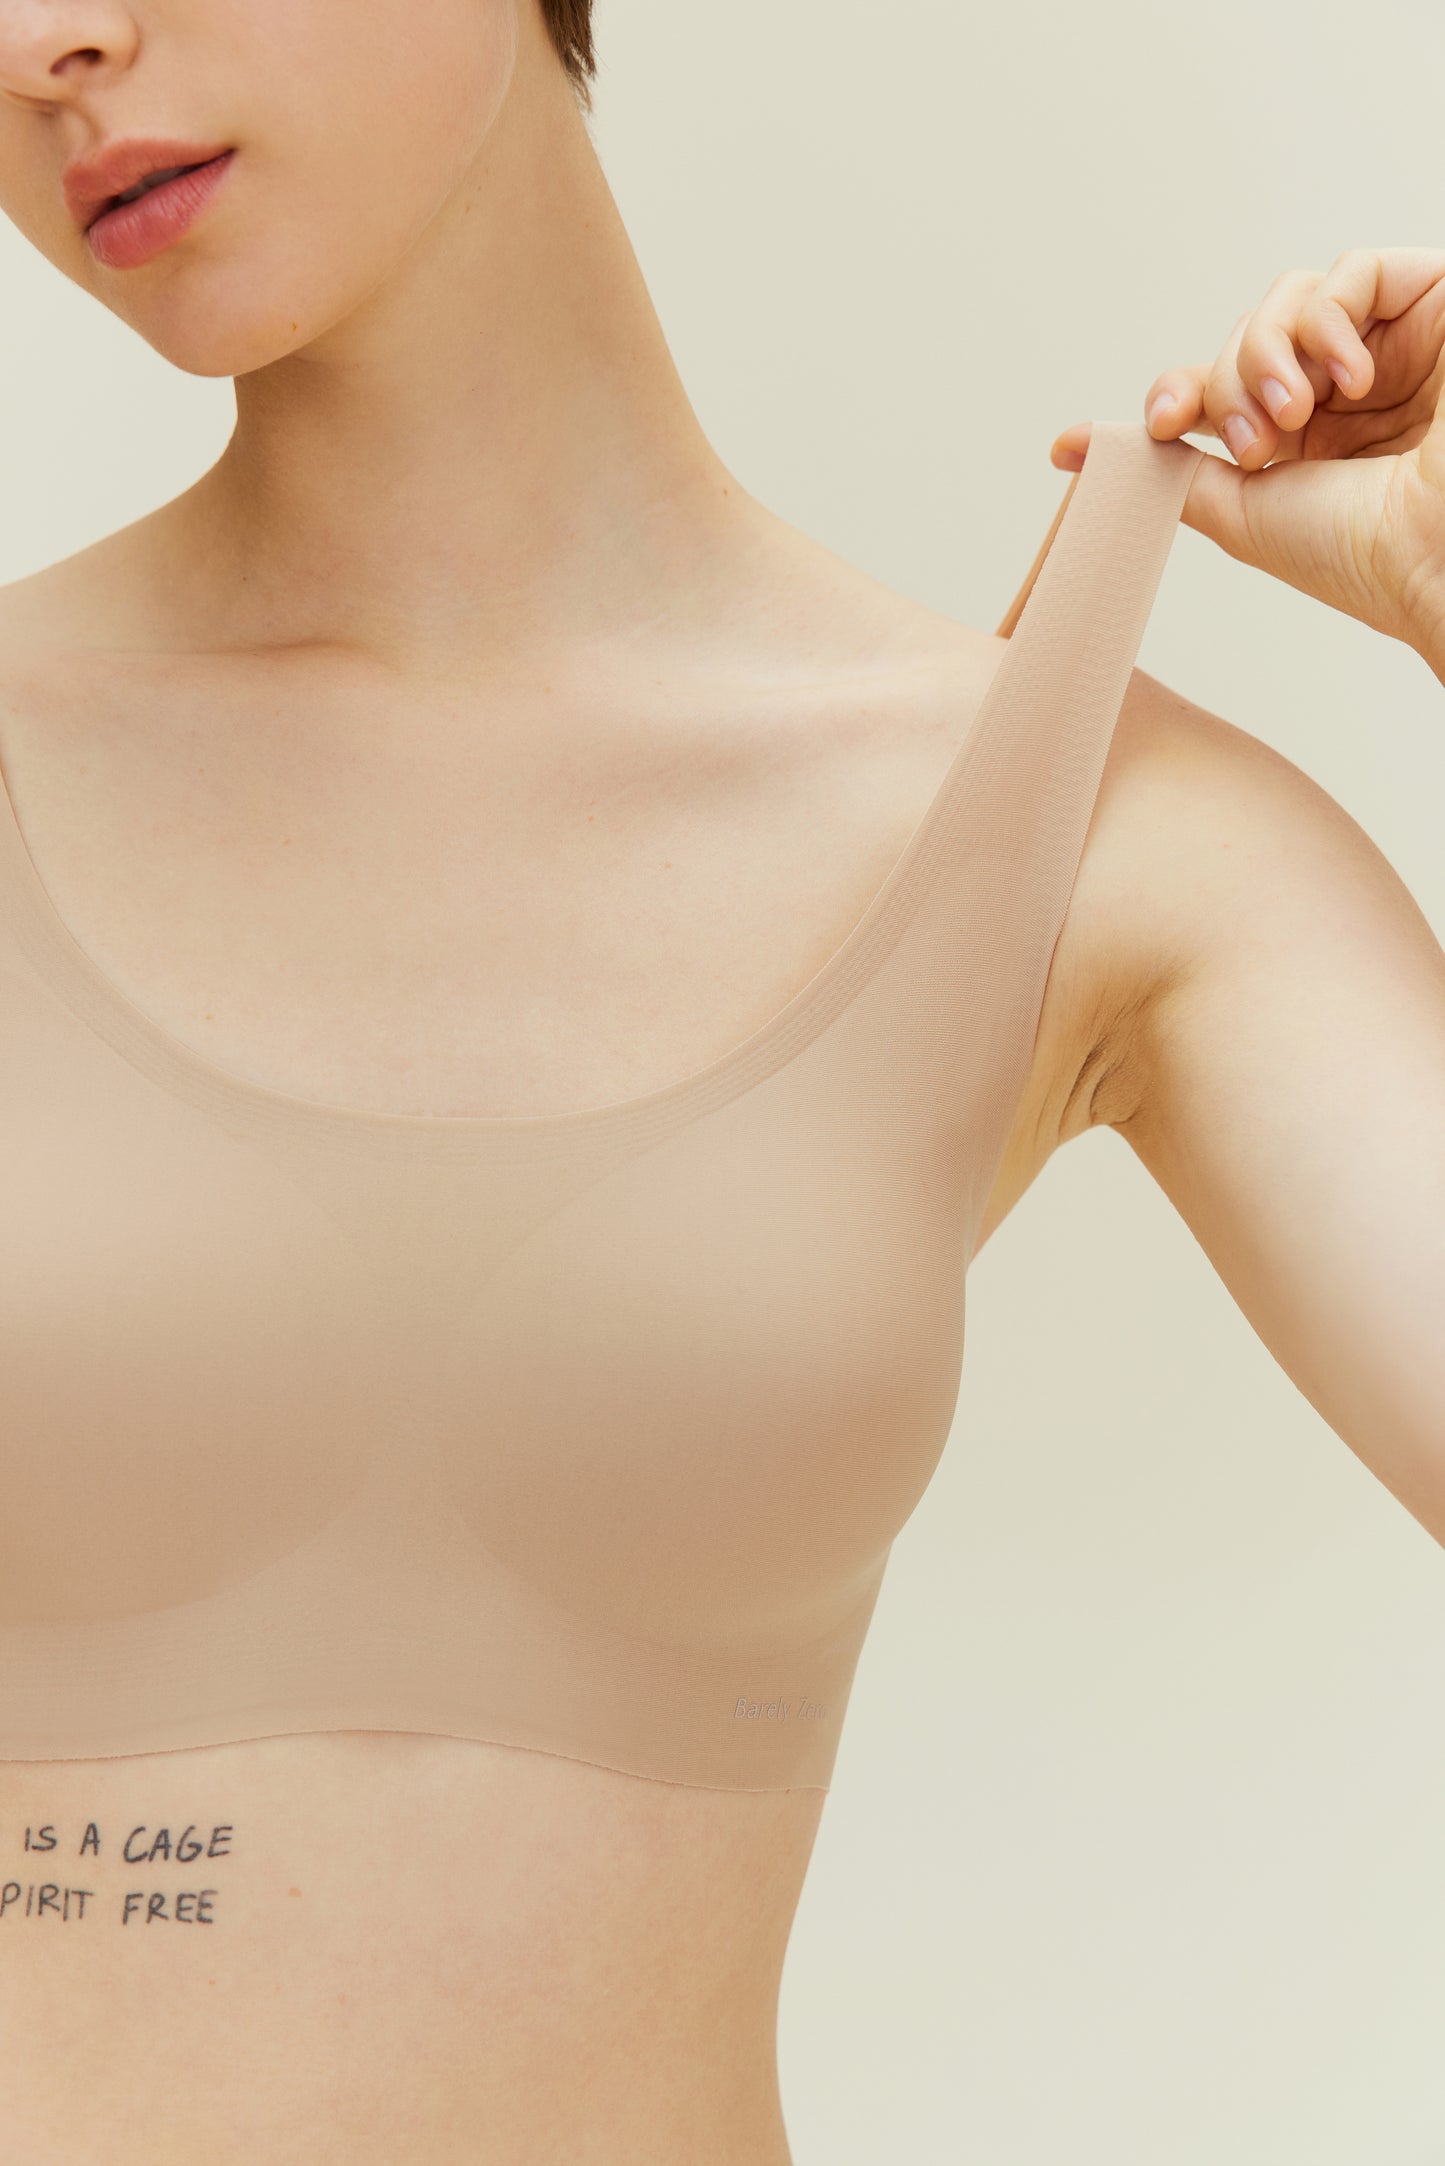 A young woman wearing a Barely Zero Classic Bra in beige